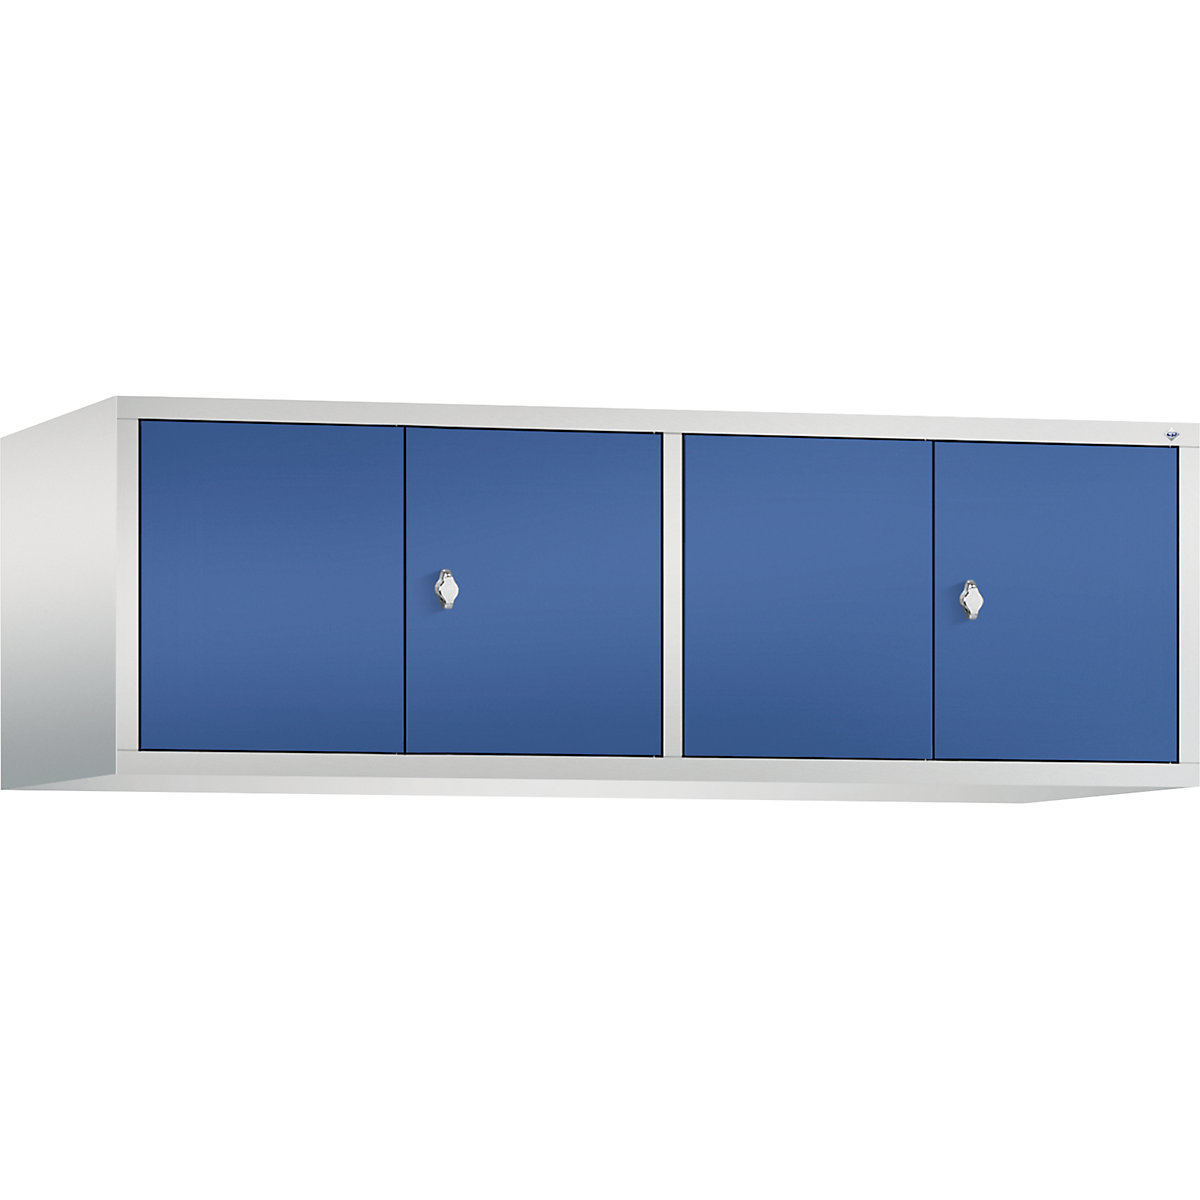 CLASSIC add-on cupboard, doors close in the middle – C+P, 4 compartments, compartment width 400 mm, light grey / gentian blue-7